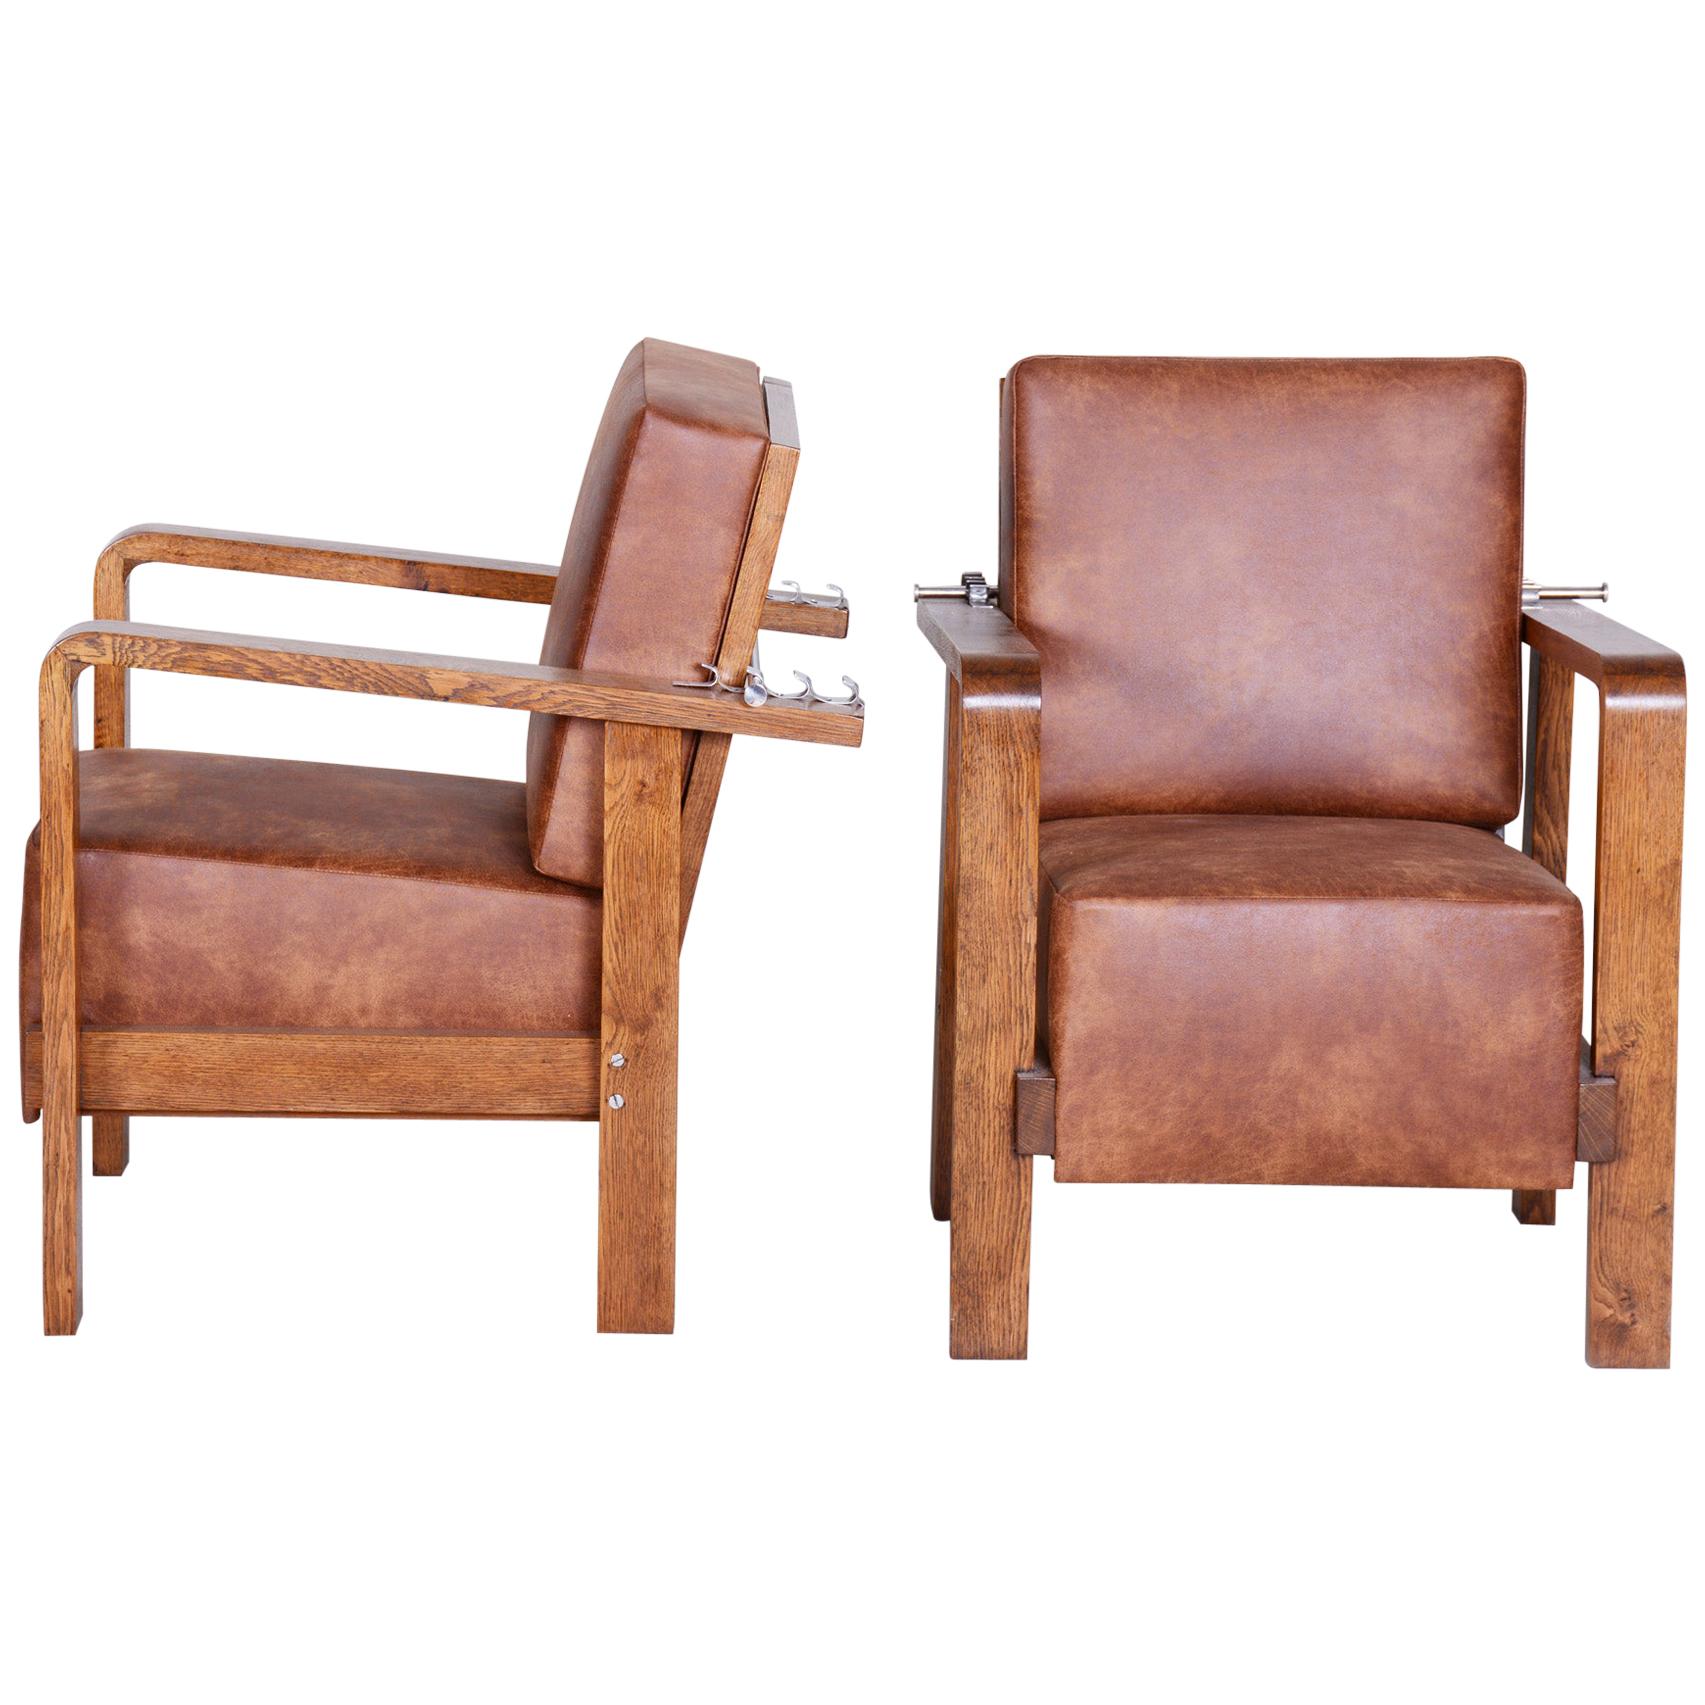 Pair of Czech Adjustable Functionalist Leather and Oak Armchairs, 1930s For Sale